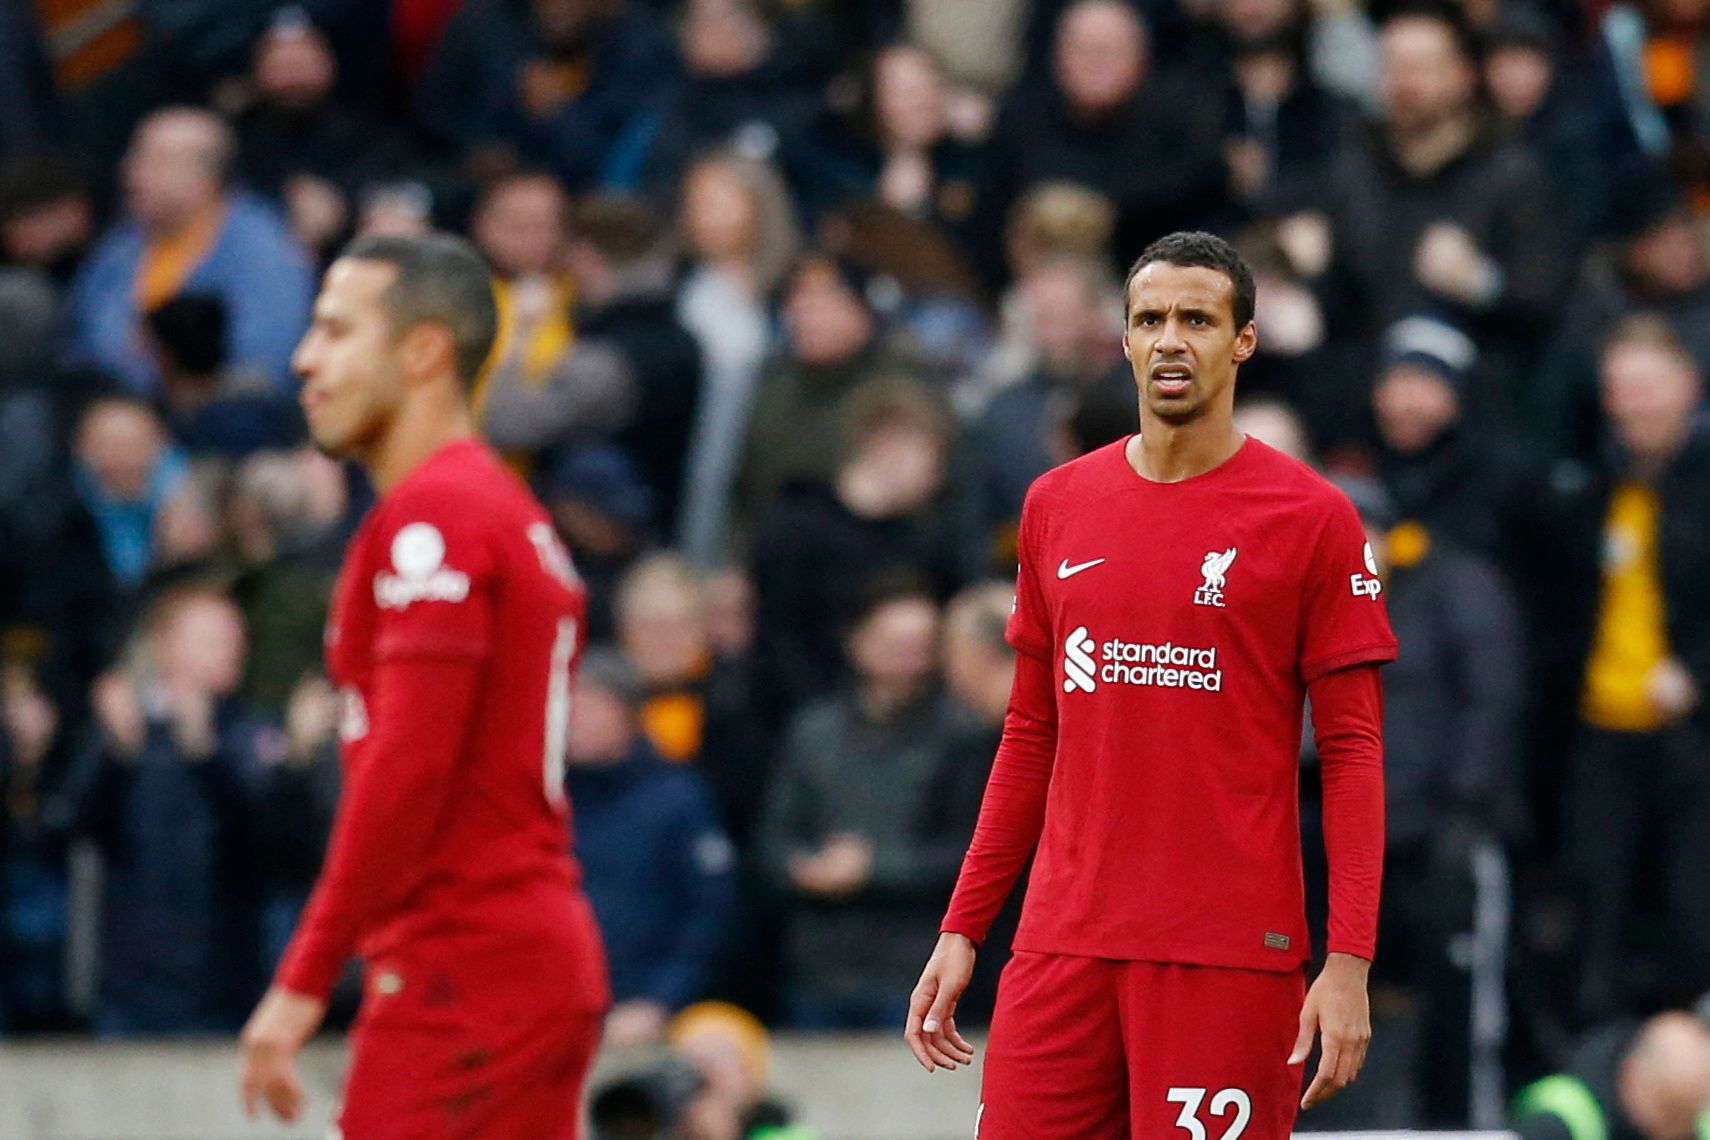 Soccer Football - Premier League - Wolverhampton Wanderers v Liverpool - Molineux Stadium, Wolverhampton, Britain - February 4, 2023 Liverpool's Joel Matip looks dejected after Wolverhampton Wanderers' Craig Dawson scores their second goal Action Images via Reuters/Ed Sykes EDITORIAL USE ONLY. No use with unauthorized audio, video, data, fixture lists, club/league logos or 'live' services. Online in-match use limited to 75 images, no video emulation. No use in betting, games or single club /leag